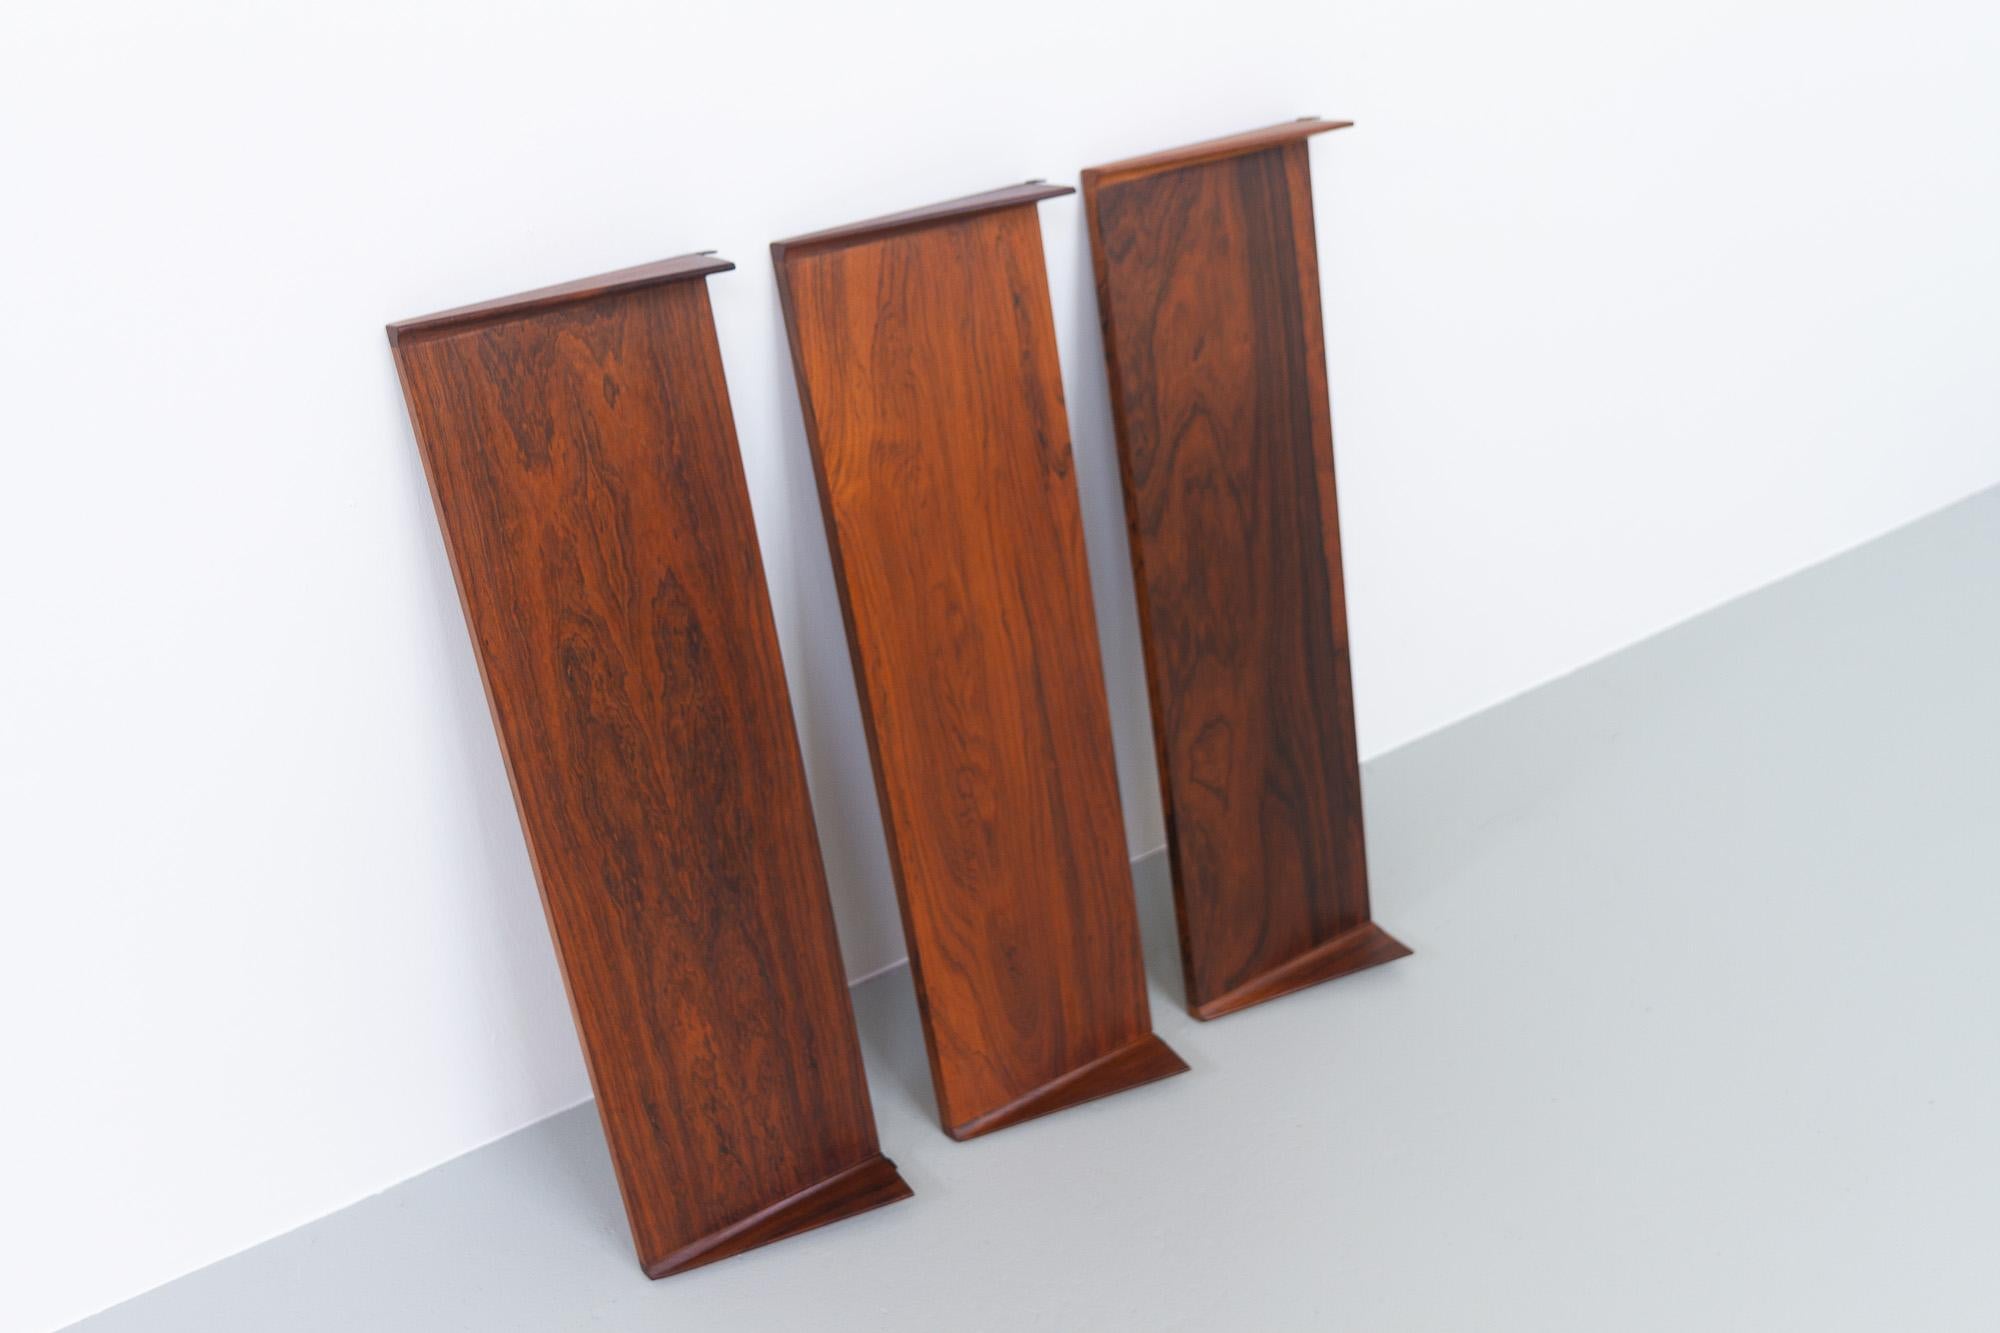 Vintage Danish Rosewood Wall Unit by Kai Kristiansen for FM, 1960s For Sale 29